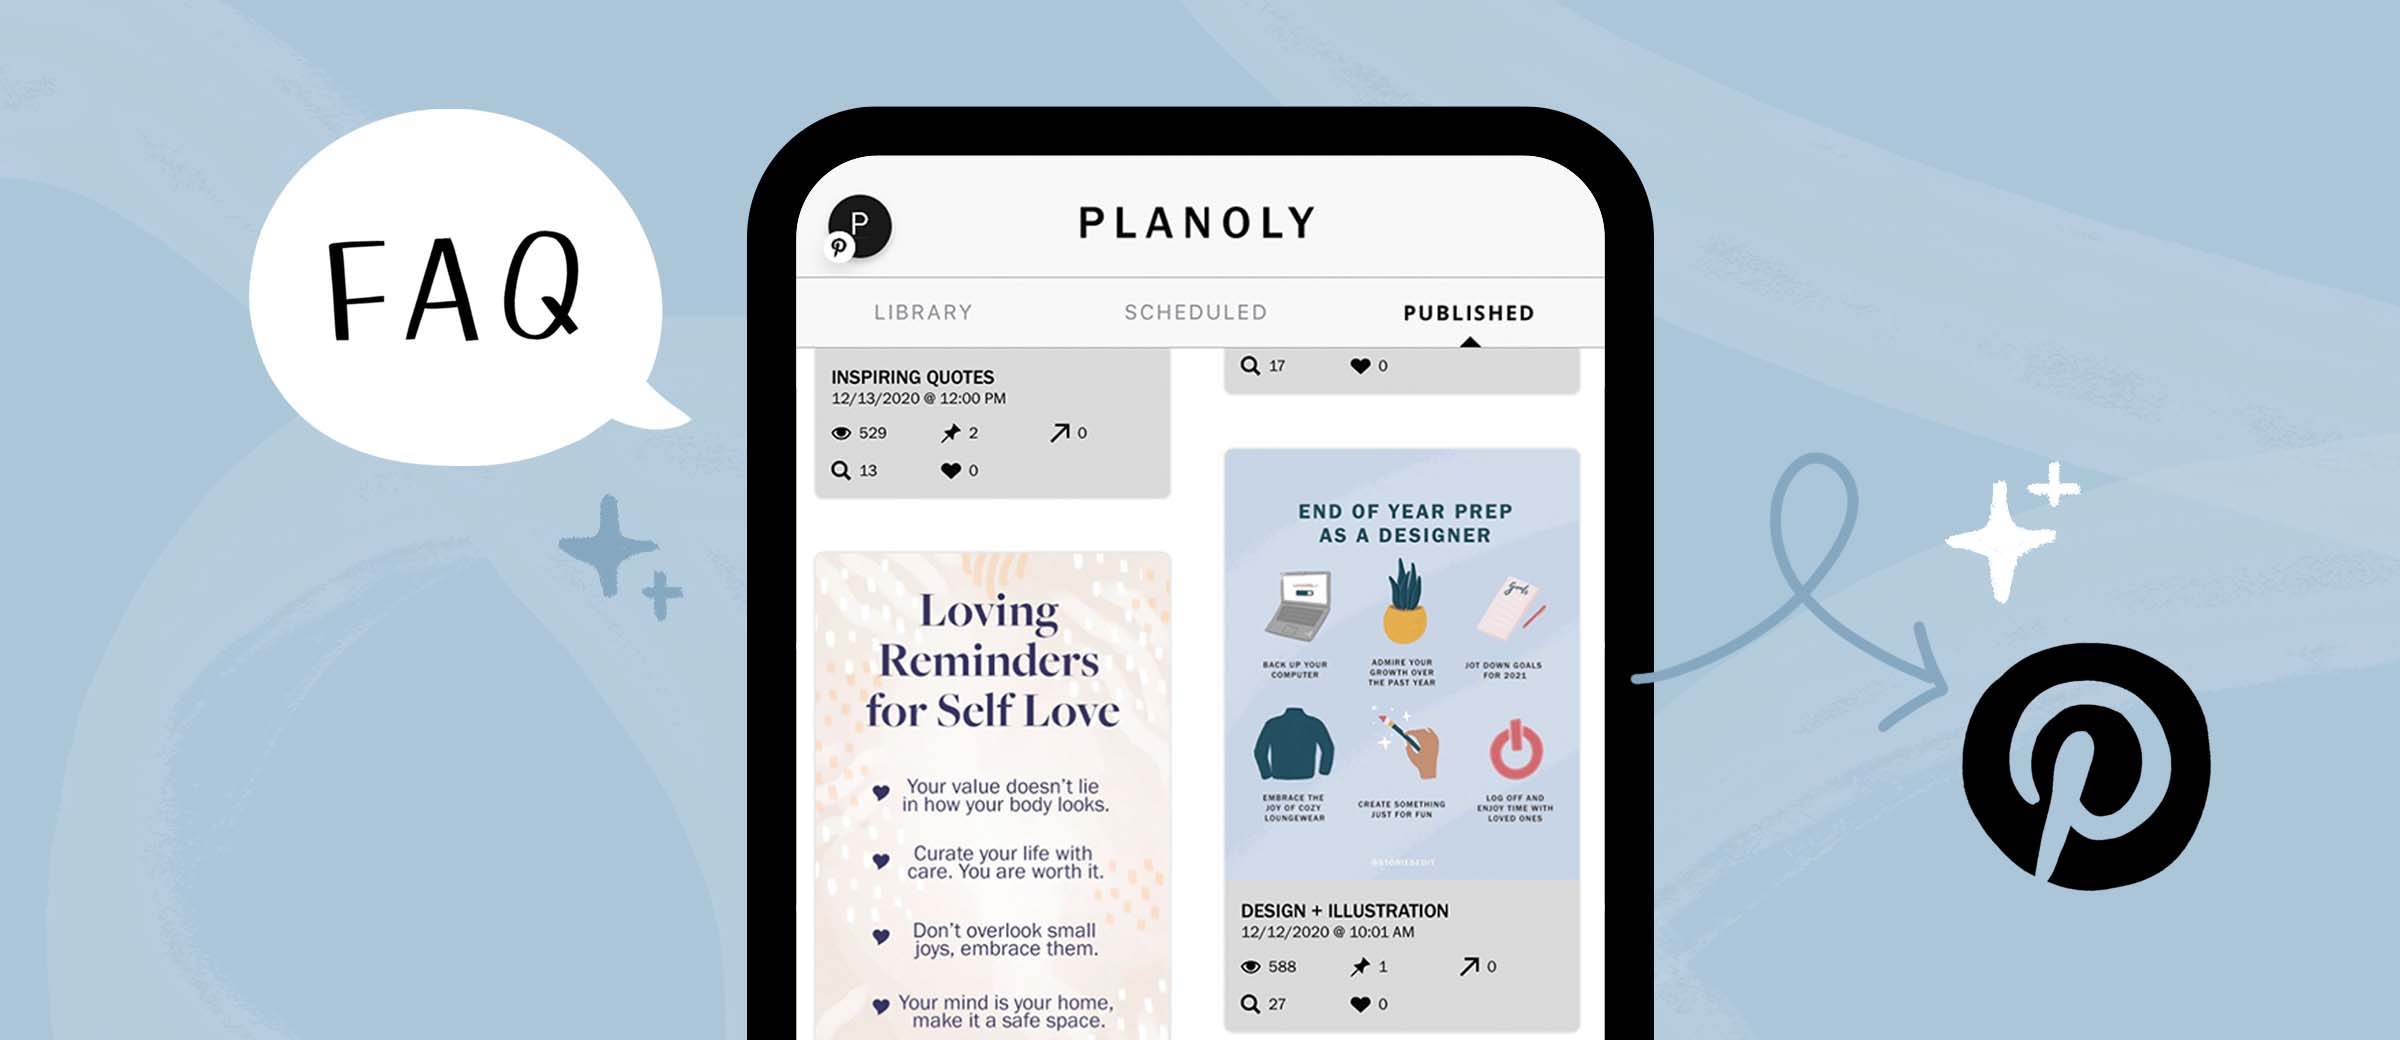 Frequently Asked Questions: PLANOLY Pin Planner, by lindsay-campbell